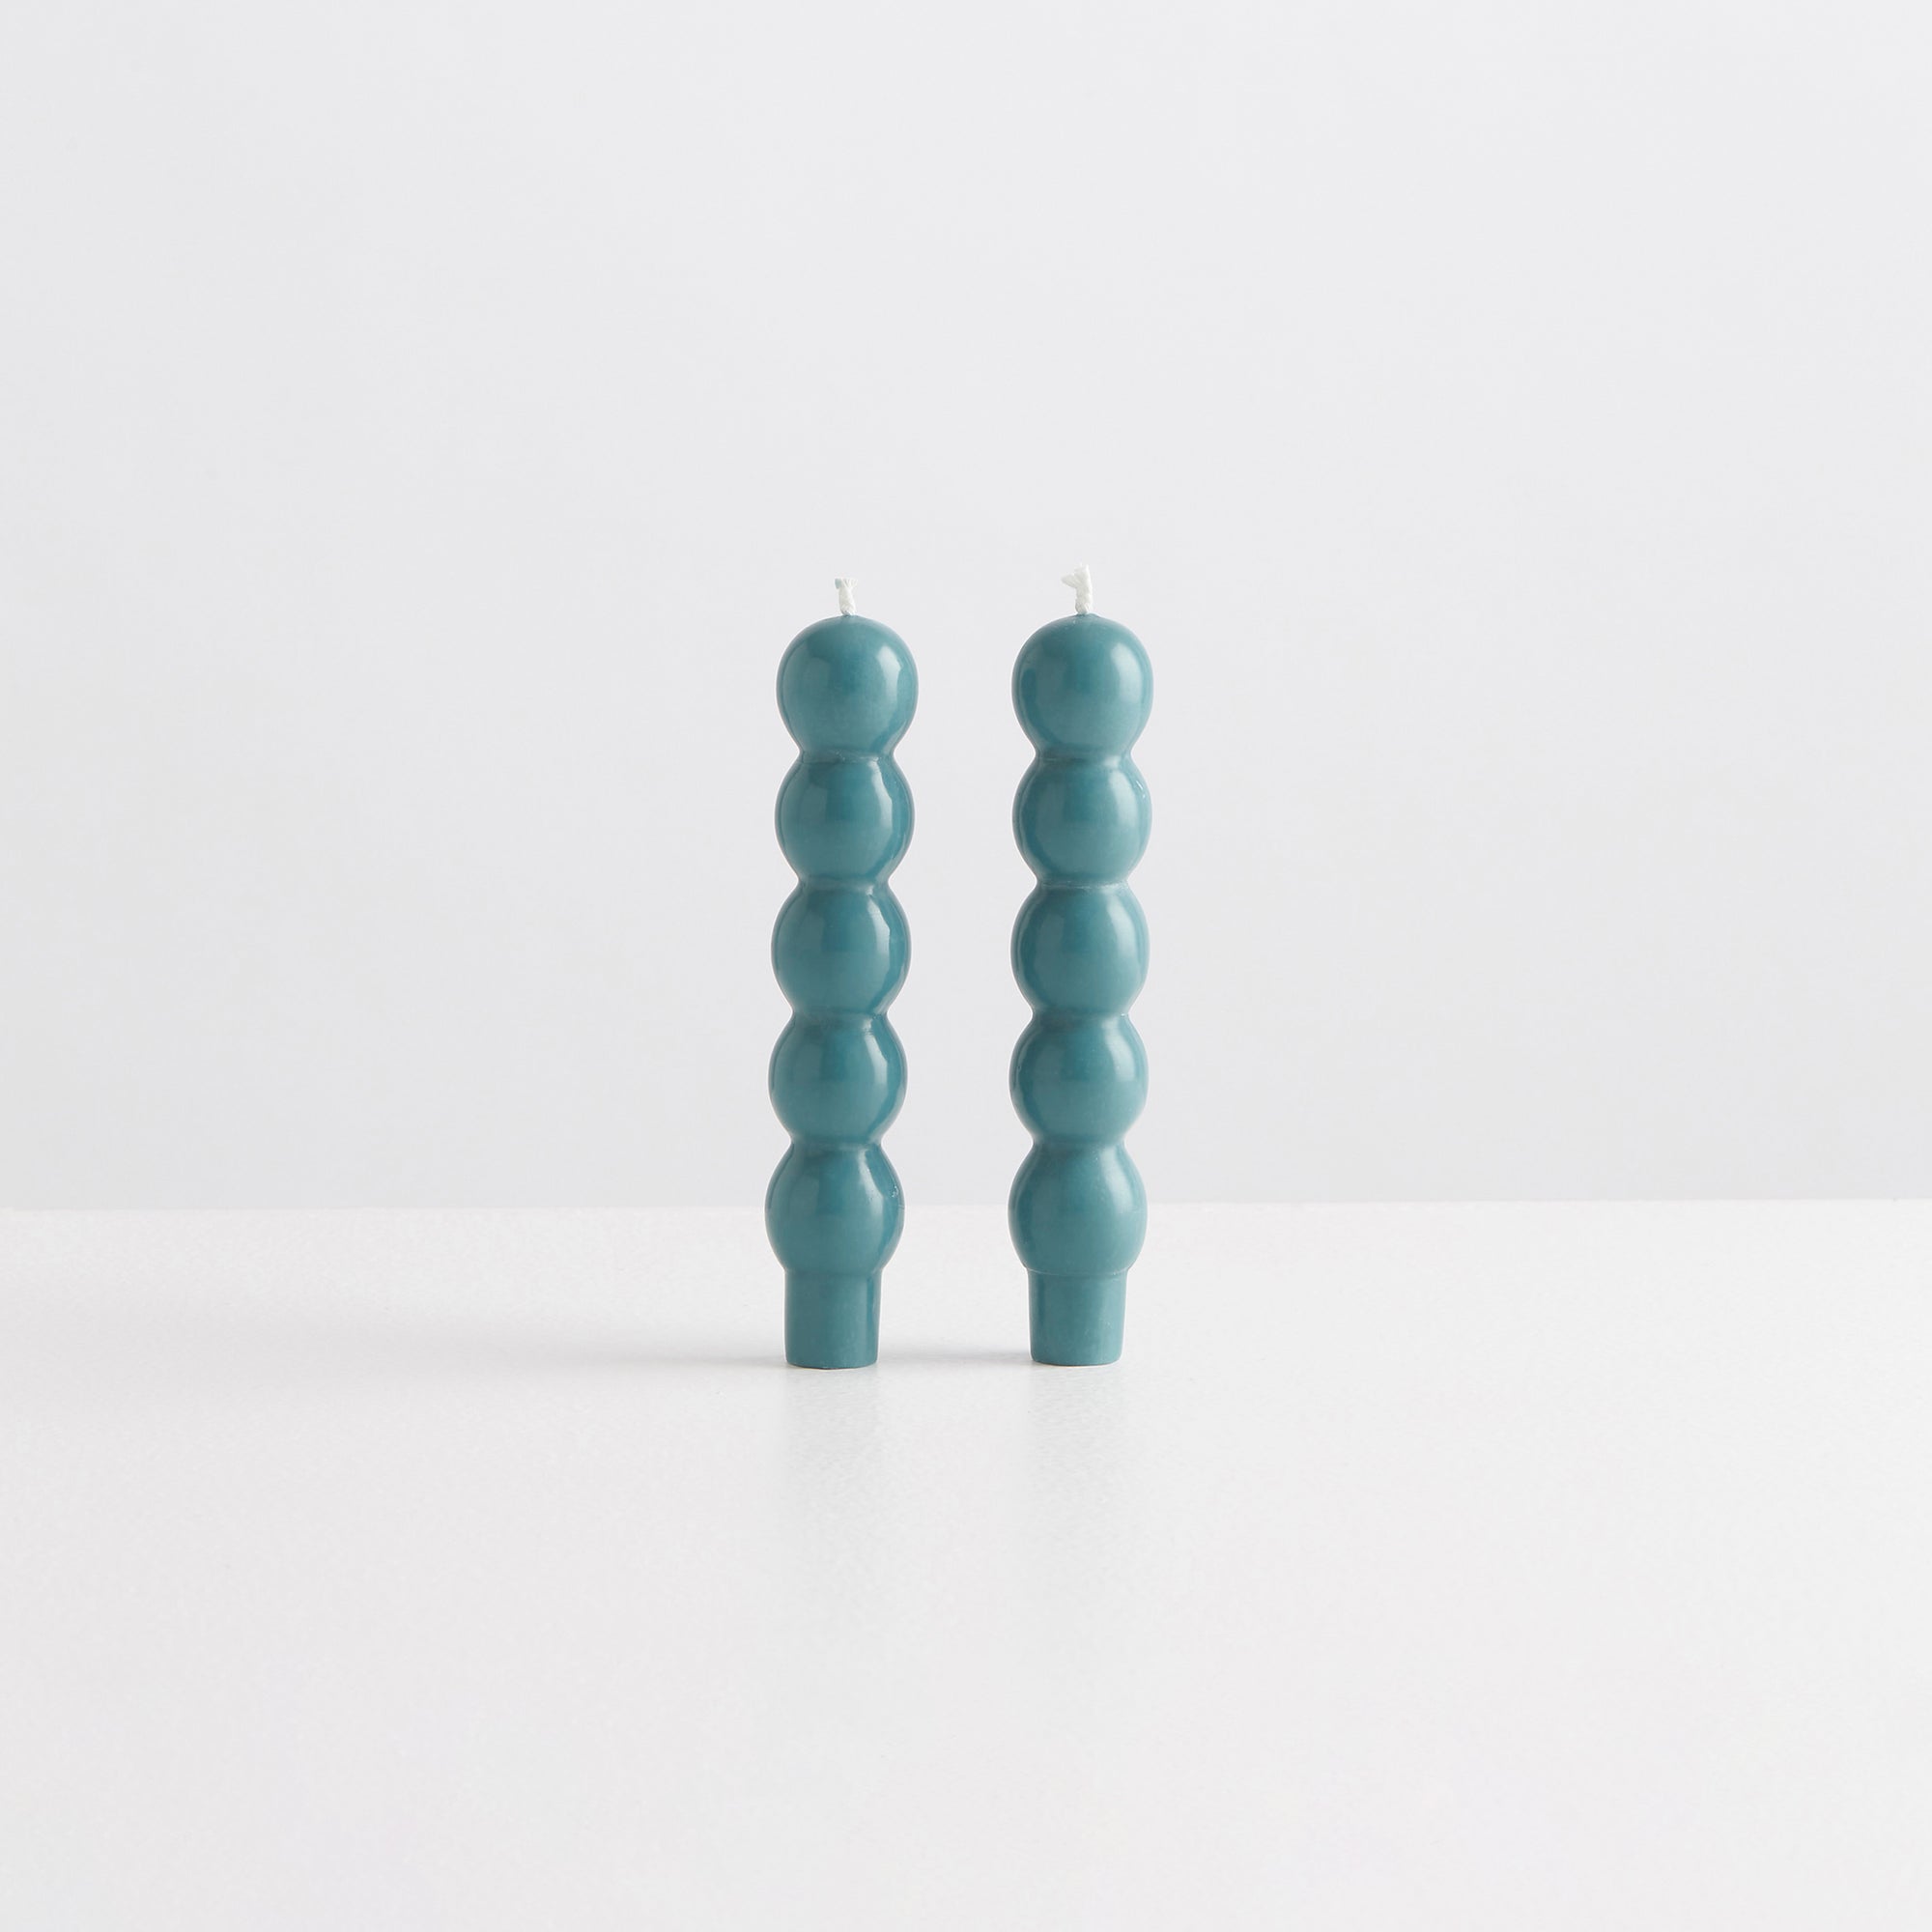 2 Volute Candles | Teal